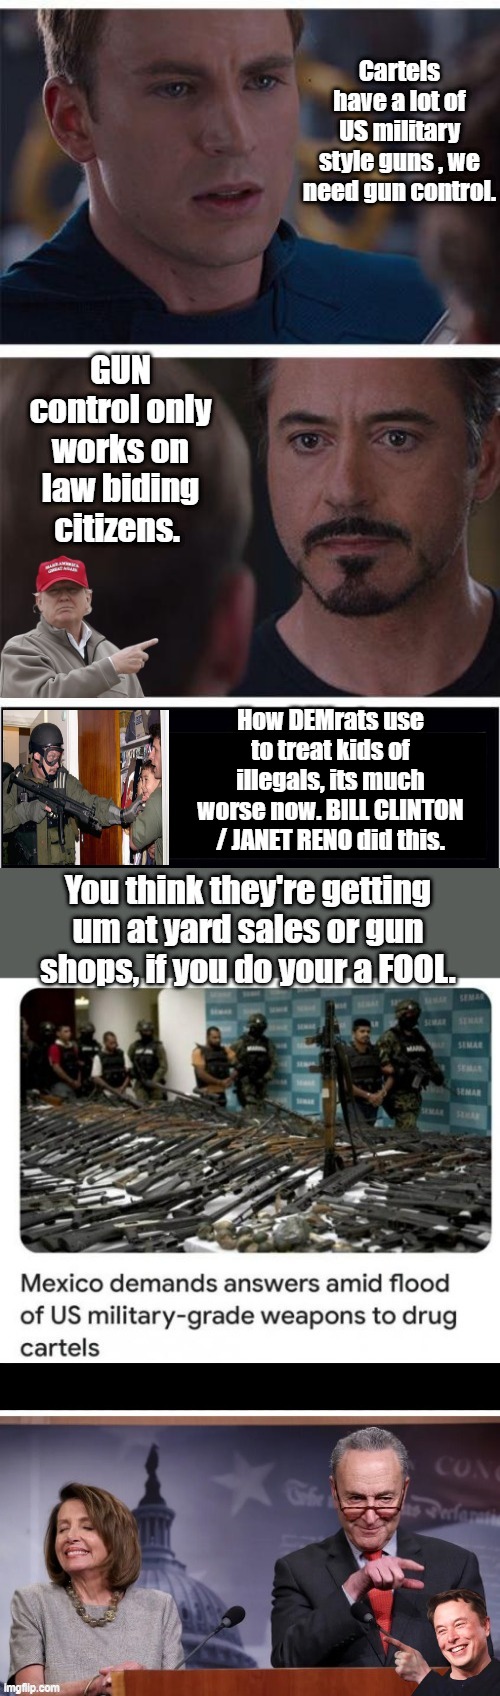 Americas corrupt gov. takes its orders from NWO not US citizens.  NATO is the NWO military not Americas. | How DEMrats use to treat kids of illegals, its much worse now. BILL CLINTON / JANET RENO did this. | image tagged in democrats,traitors,government corruption,nwo,control | made w/ Imgflip meme maker